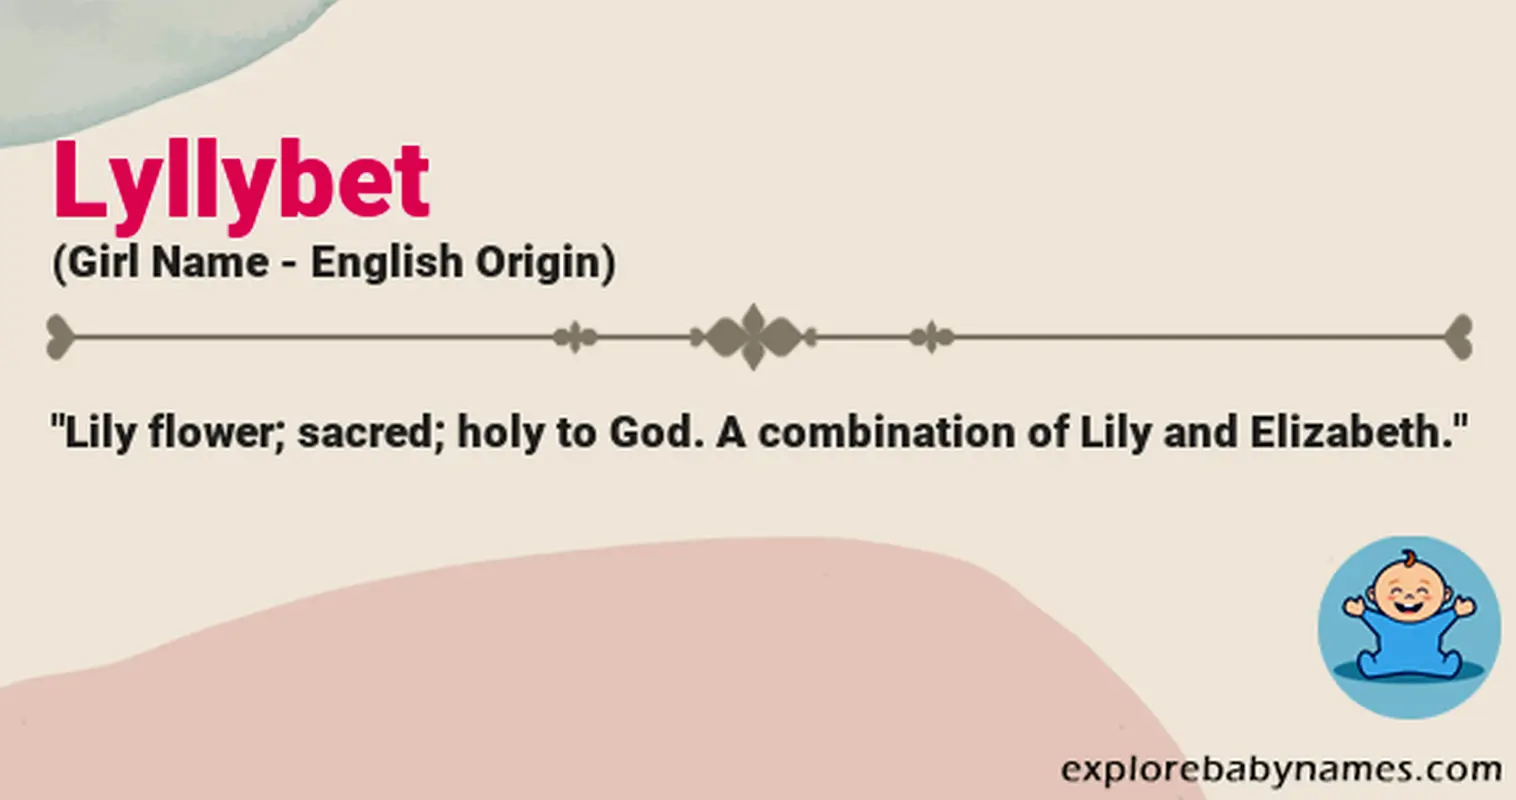 Meaning of Lyllybet